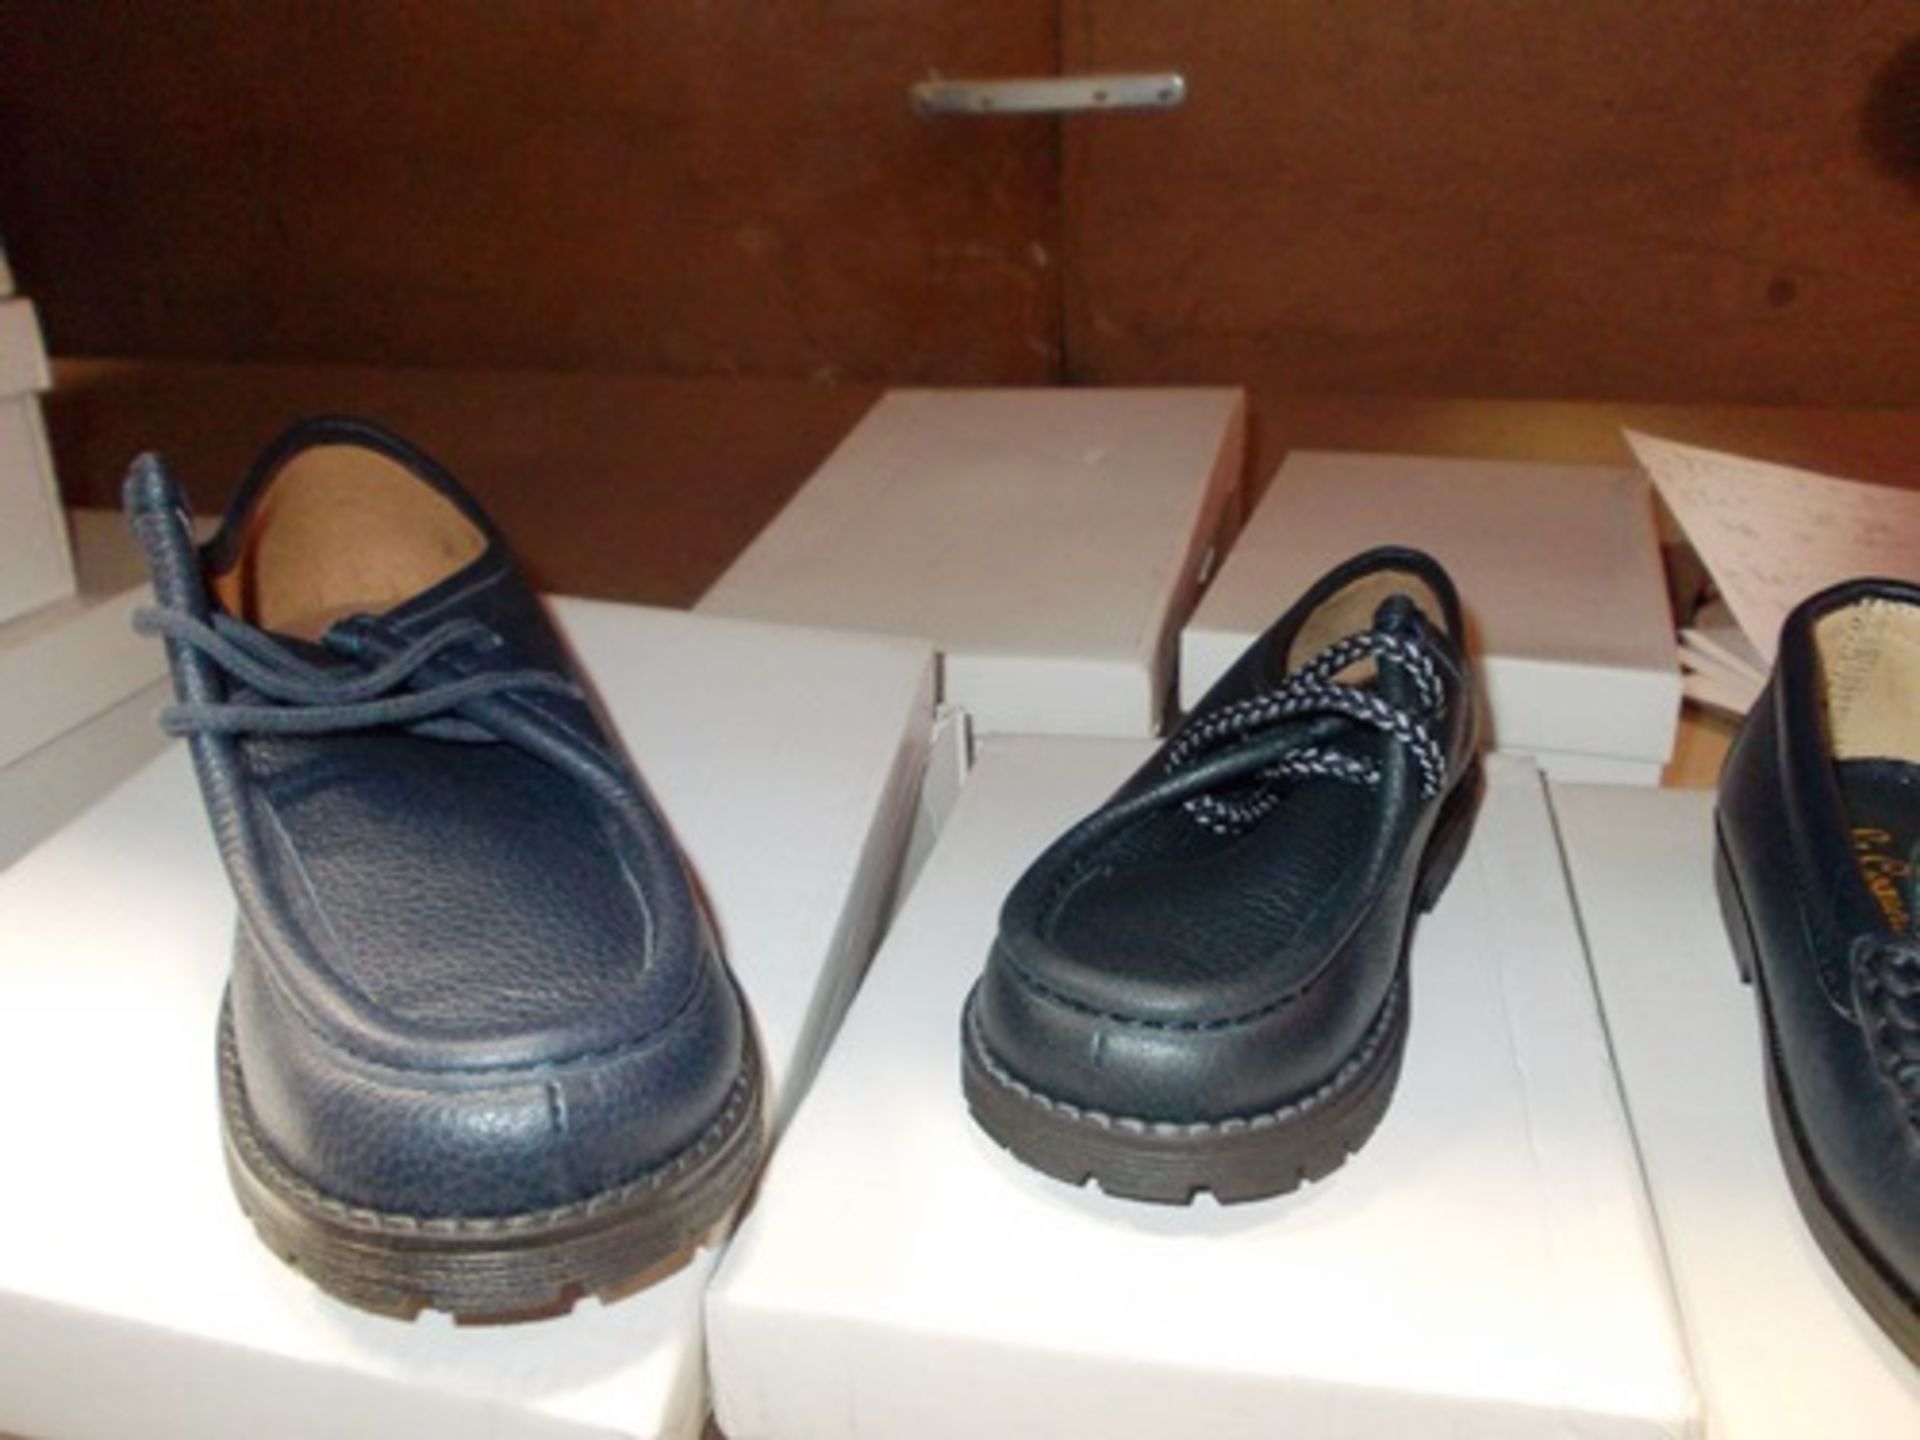 7 x pairs of La Coqueta children's leather or suede shoes, various sizes - New in box (shoe bay)